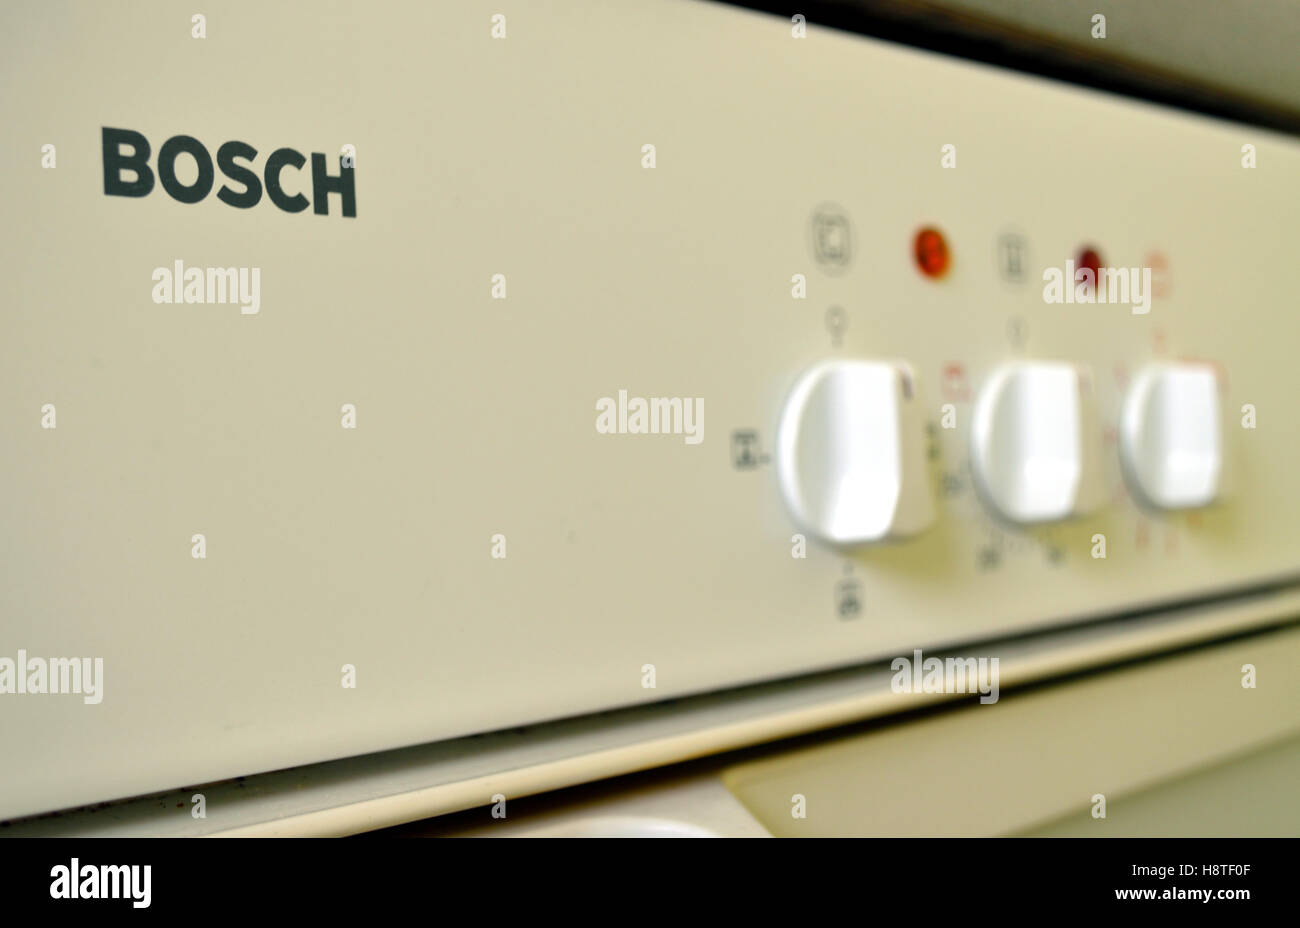 Bosch logo on an oven built in the 1980s Stock Photo